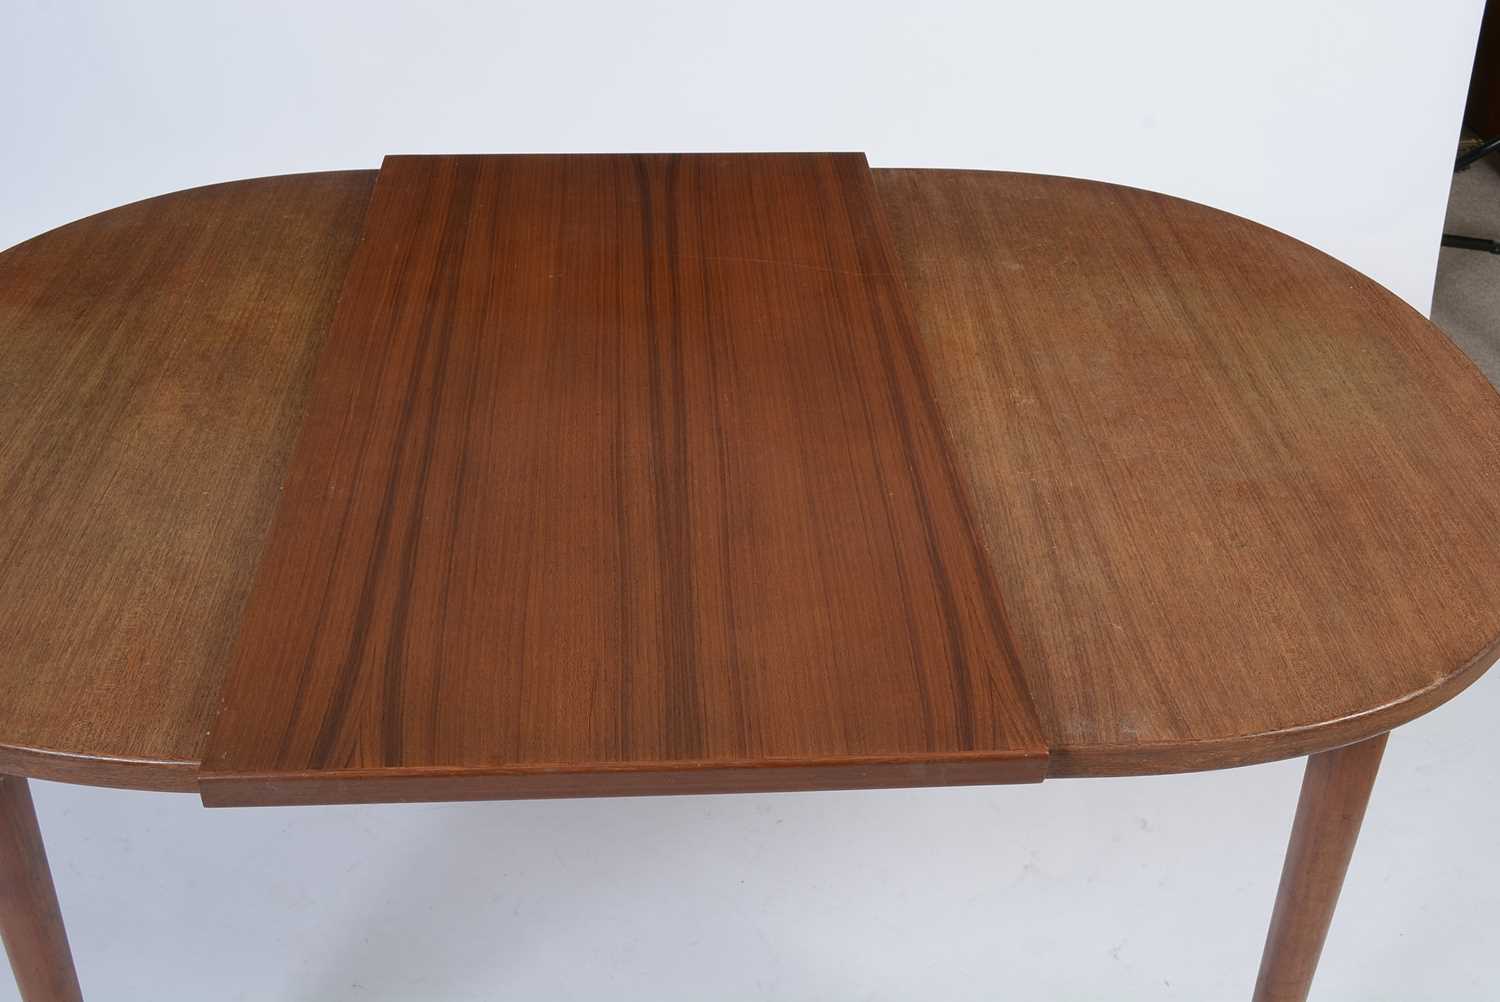 Nils Jonsson for Troeds: a Swedish teak extending dining table - Image 6 of 6